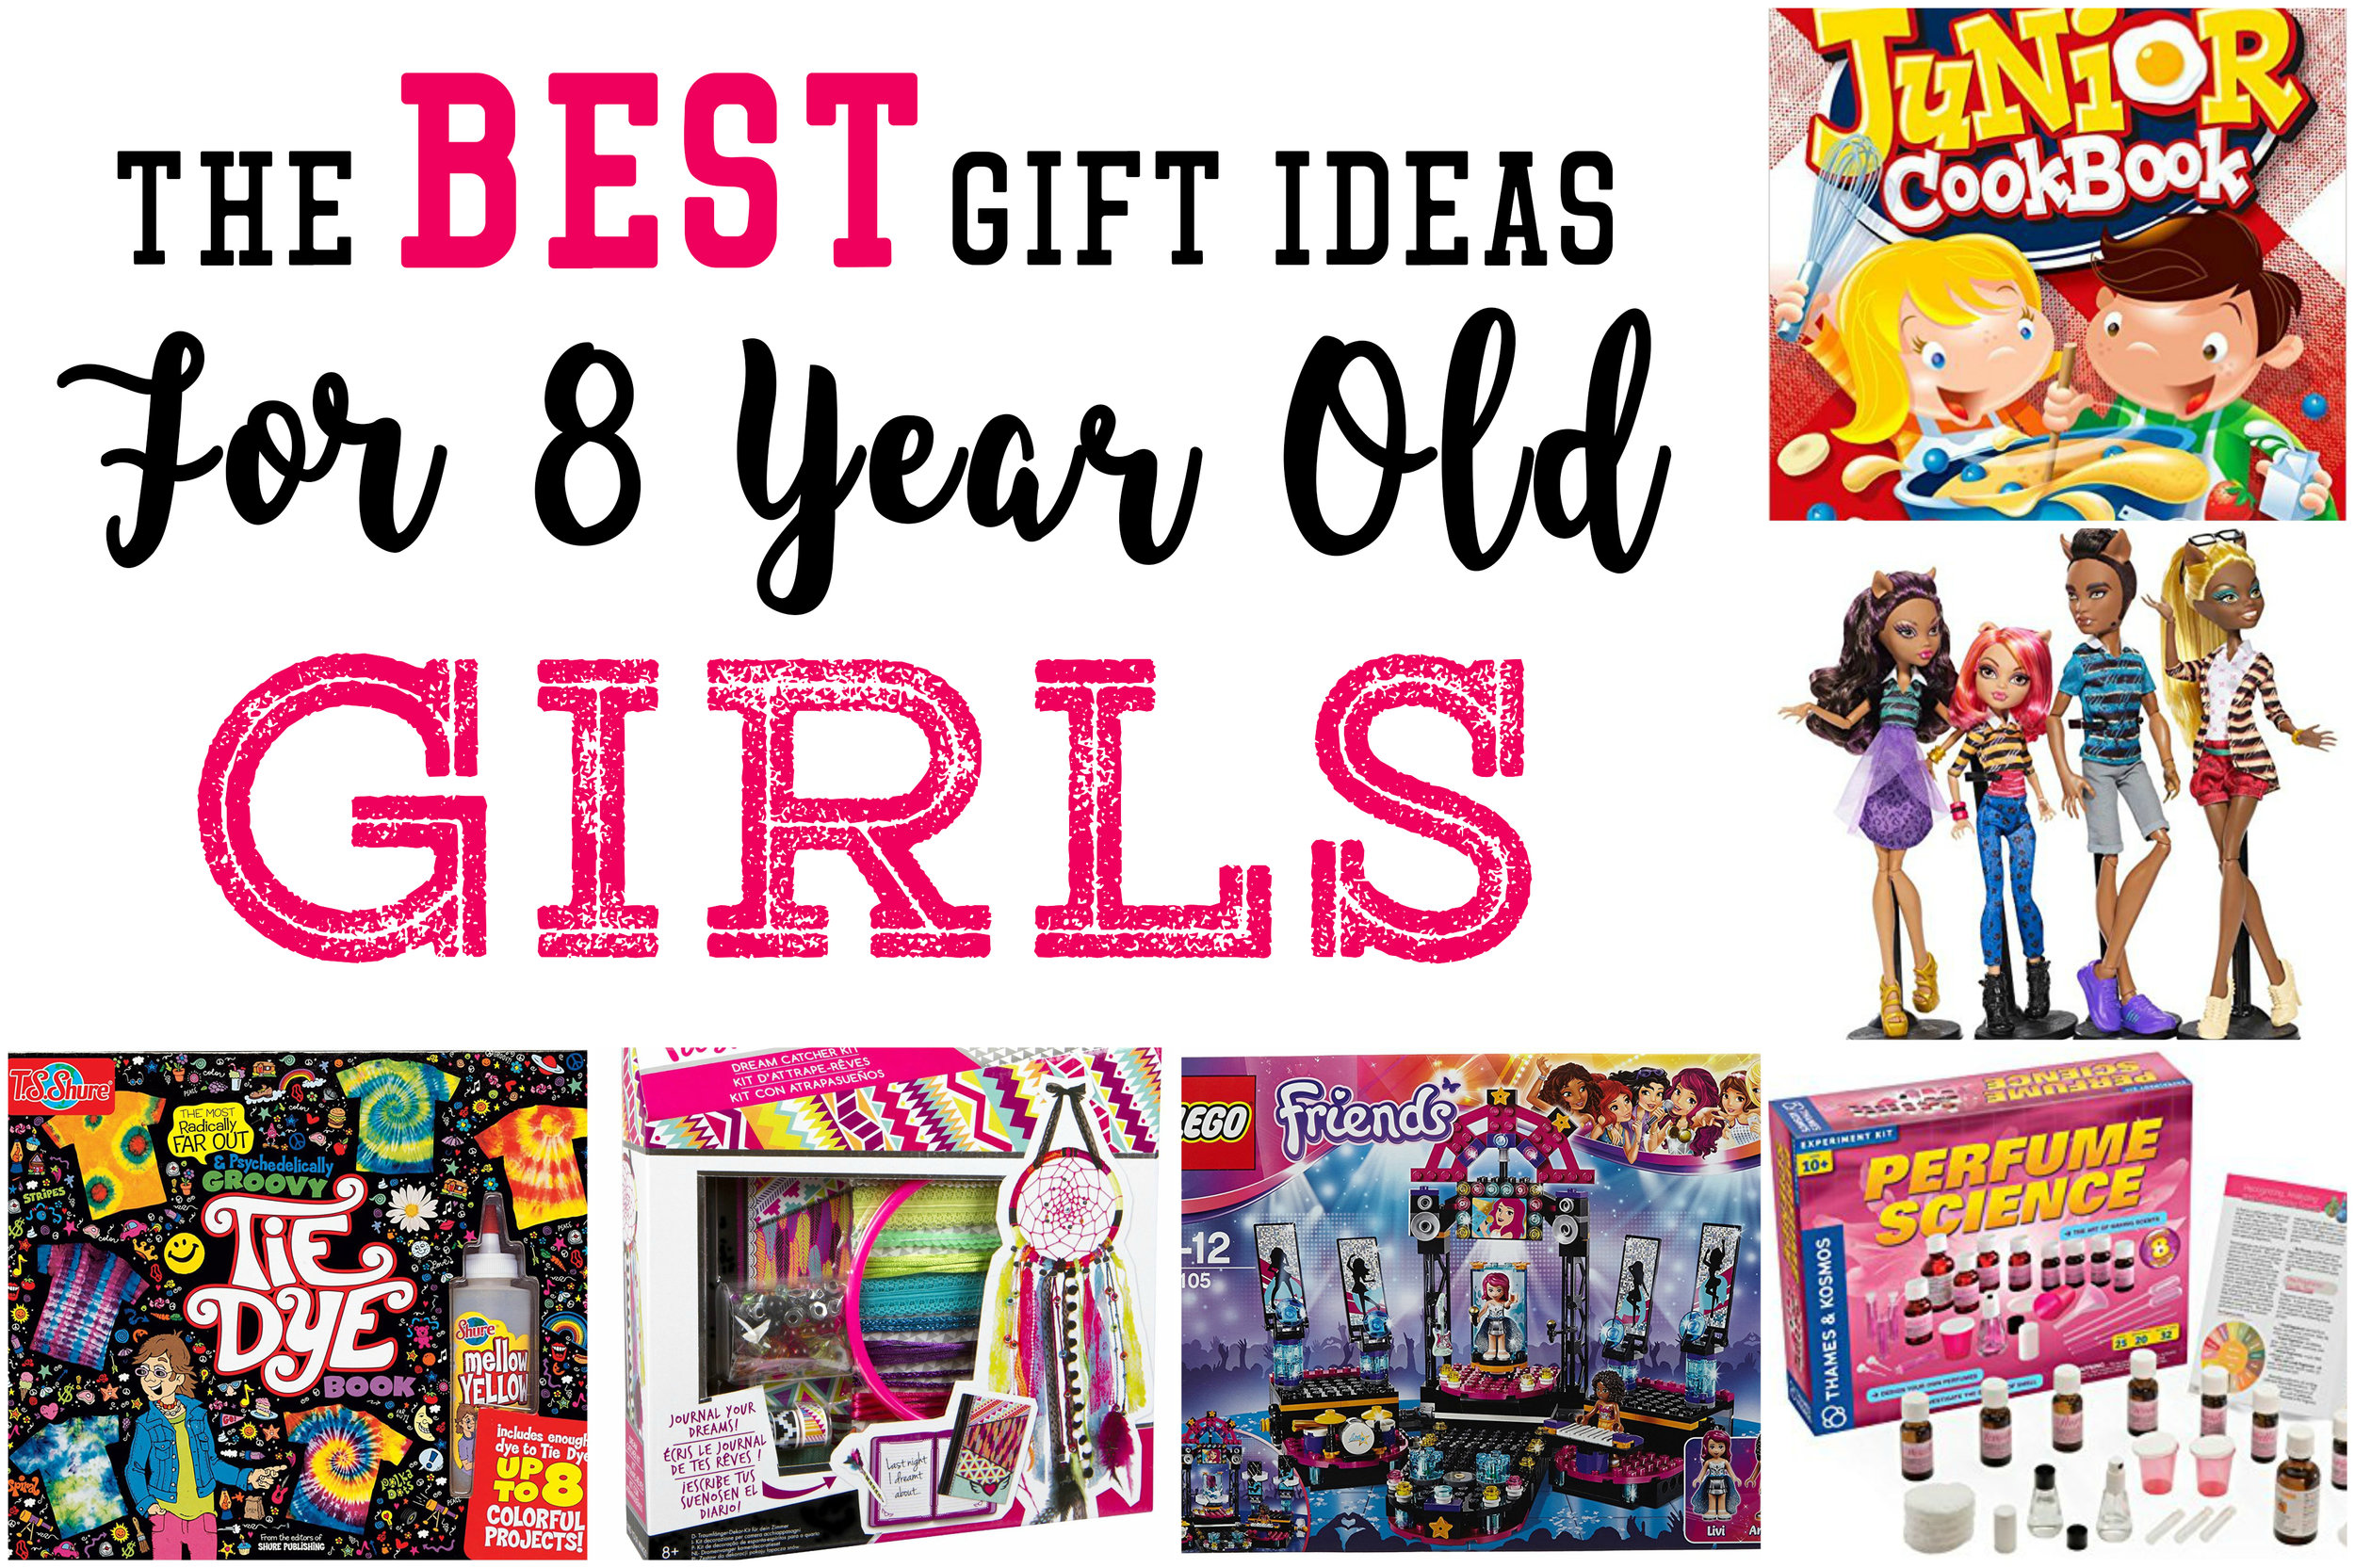 unique gifts for 8 year old